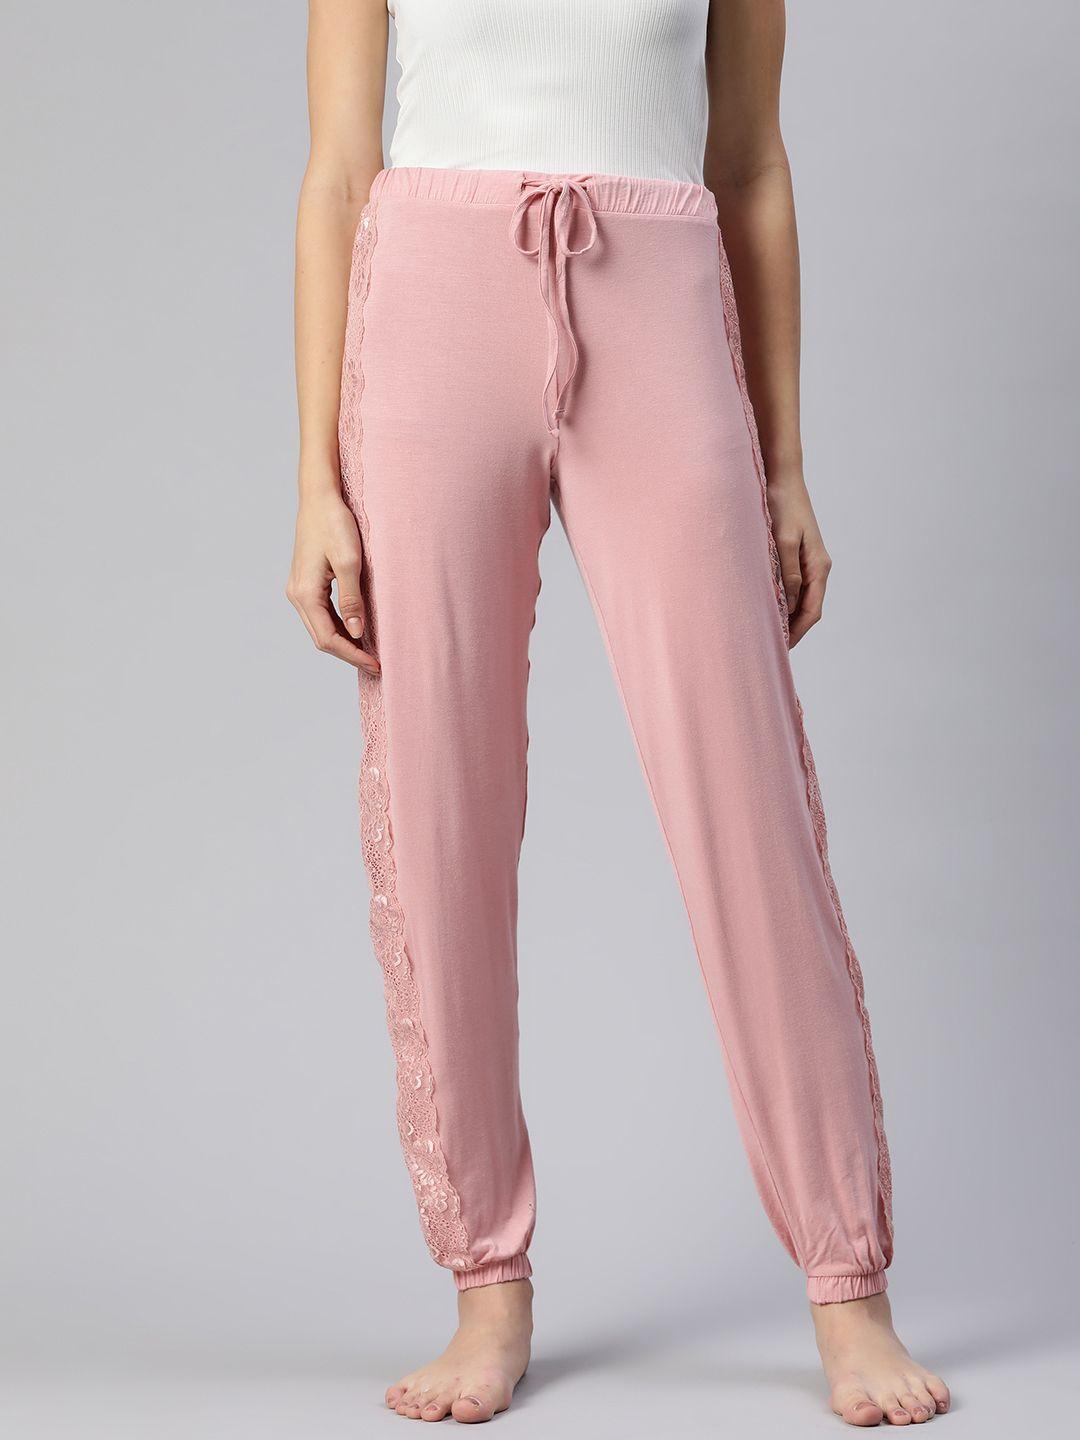 marks & spencer women solid lace detail lounge pants